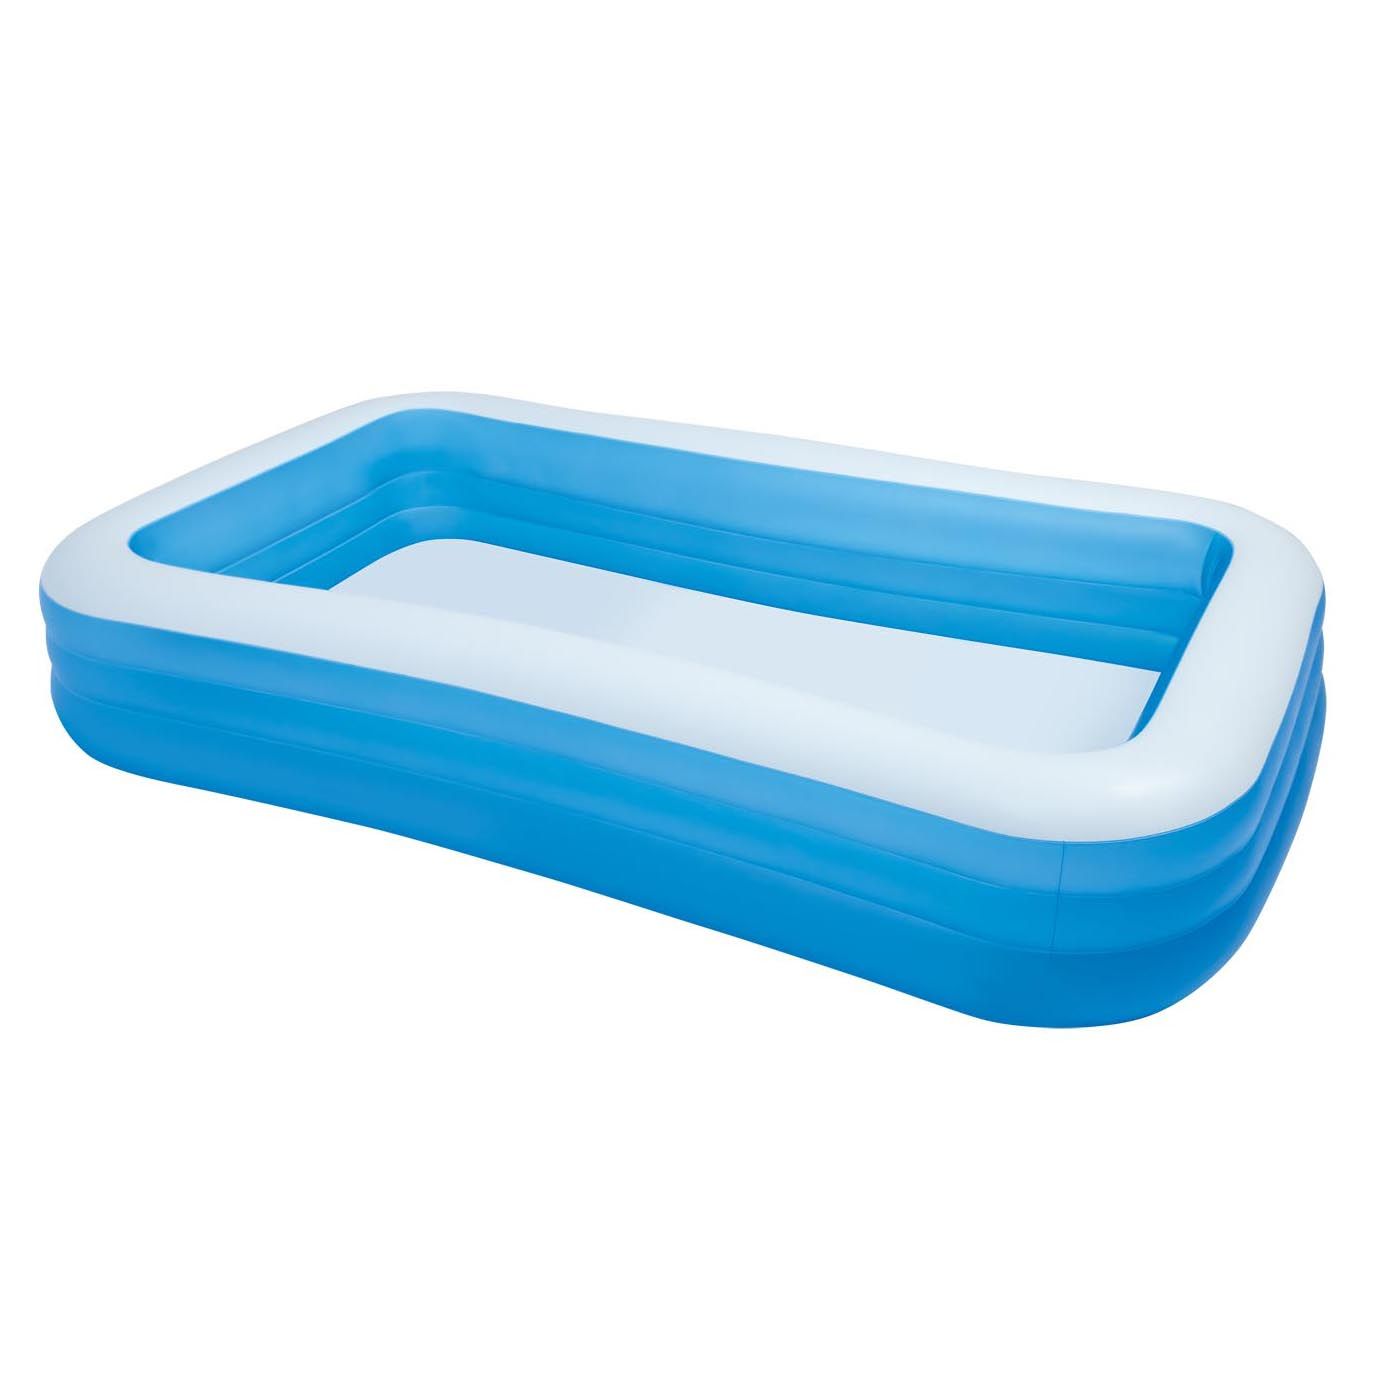 Inflatable Swimming Pool 